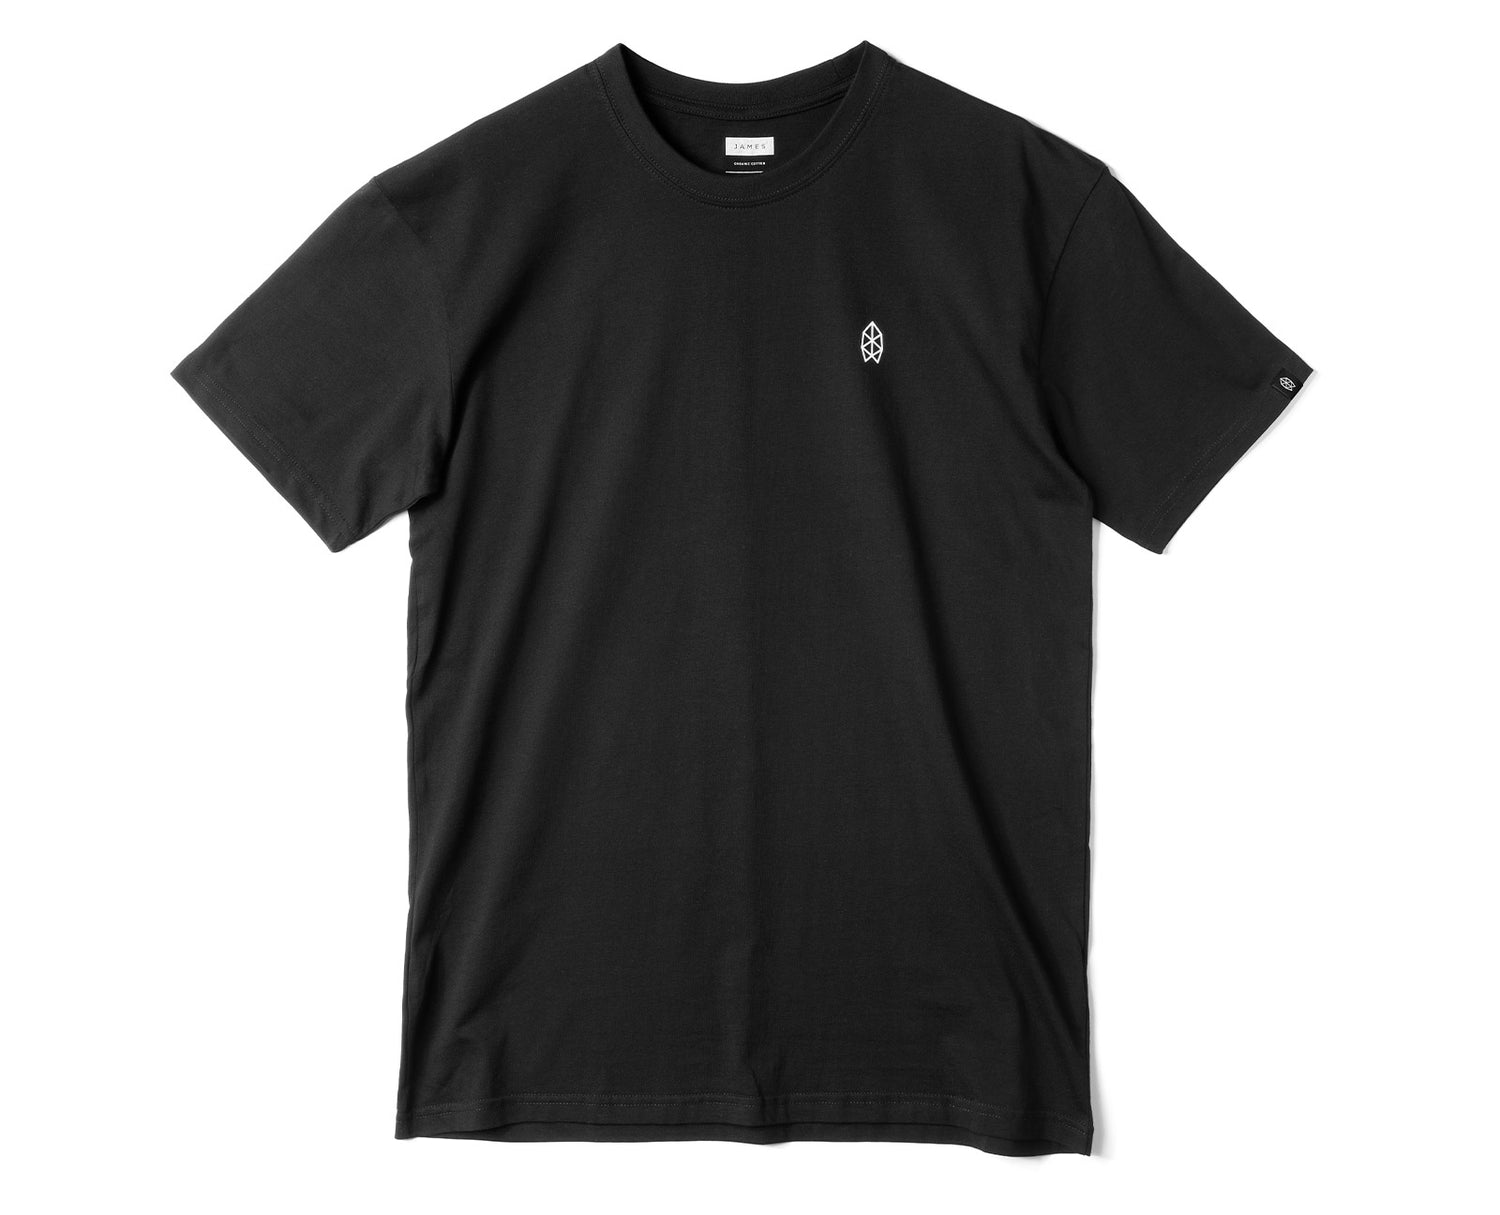 Front of black t-shirt